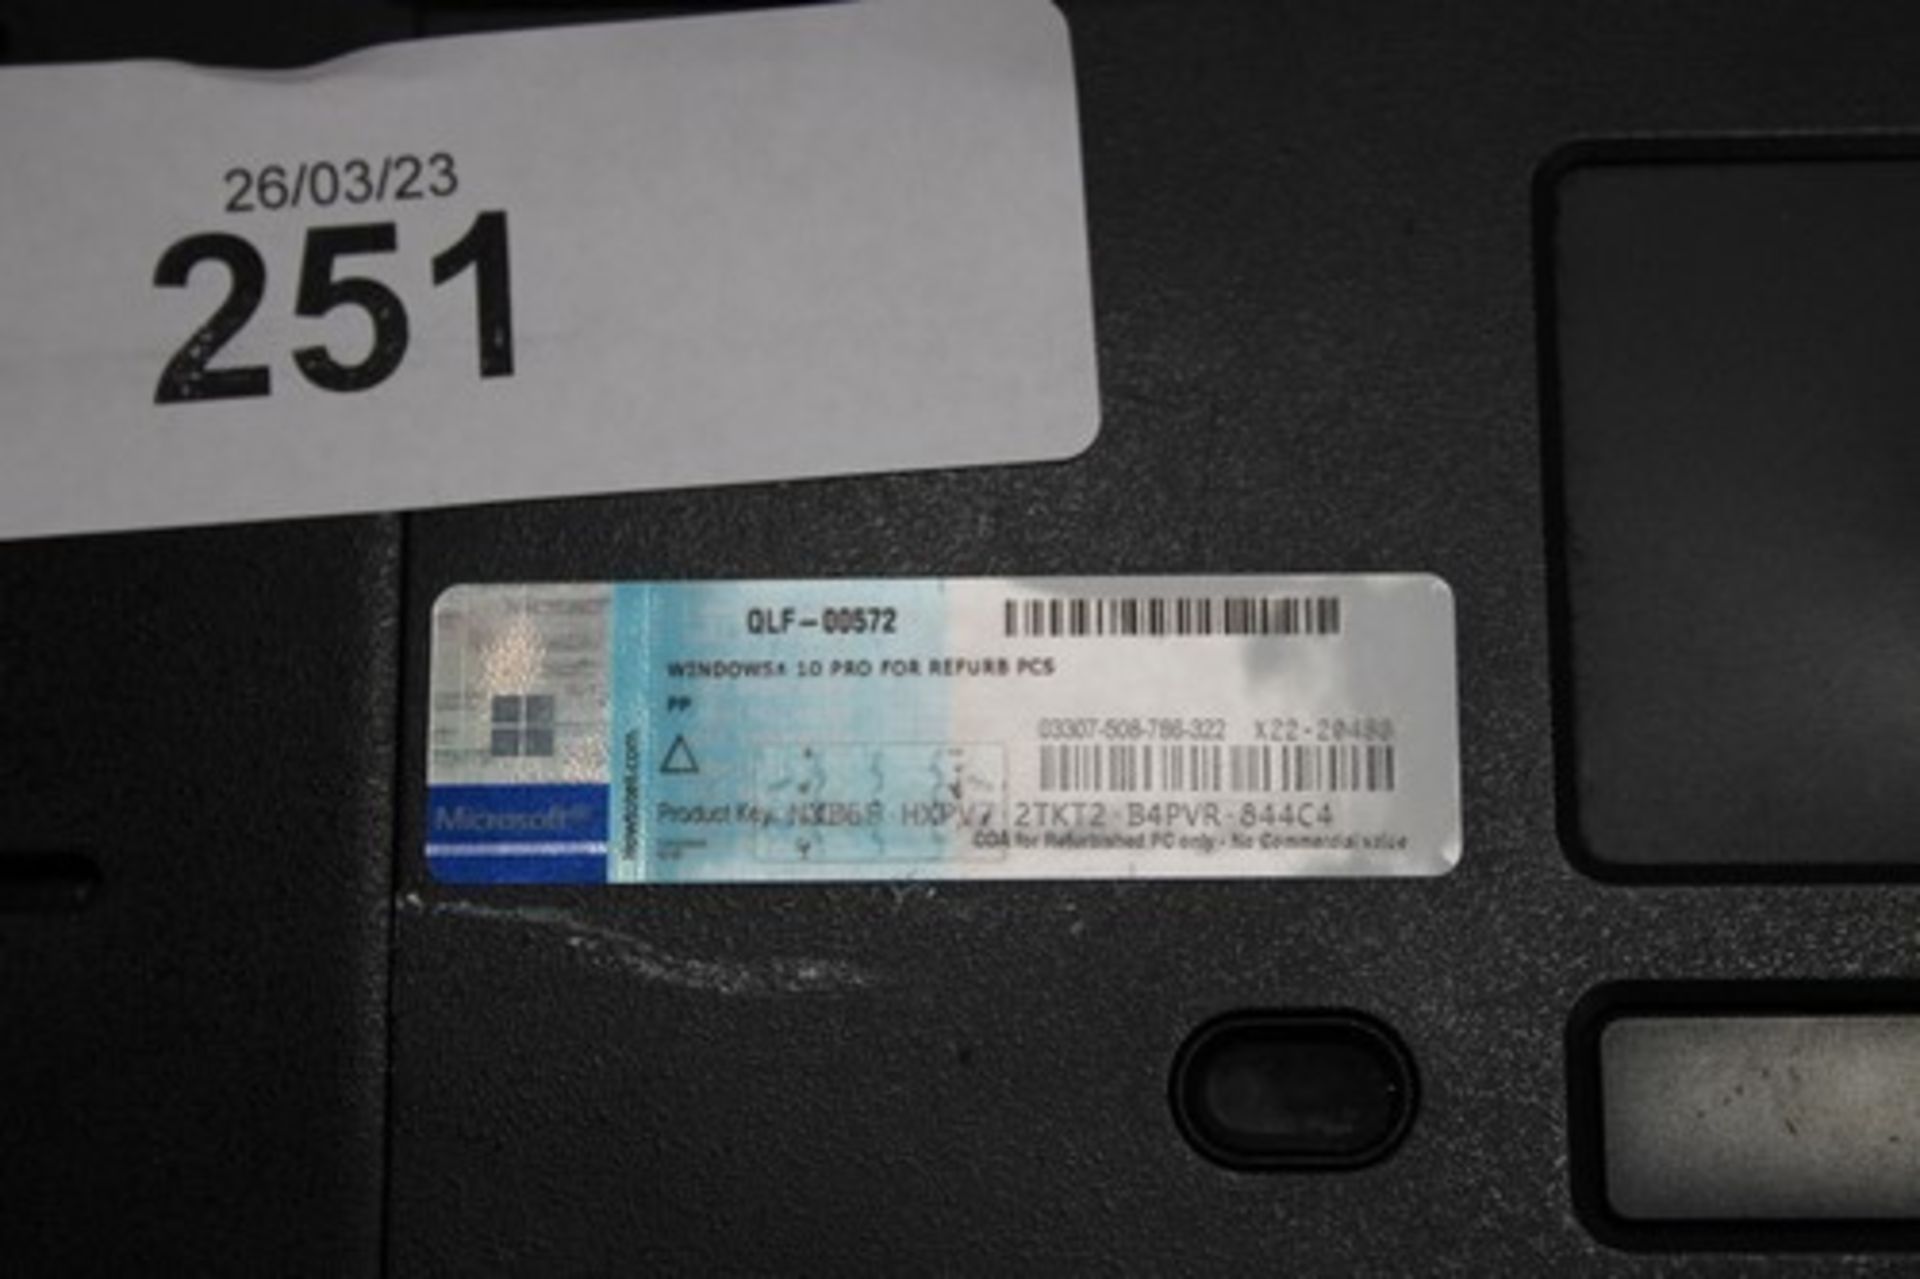 1 x Dell P45G, model: Latitude 14" rugged extreme 7414 laptop with 156300U processor, 8gb ram, - Image 3 of 7